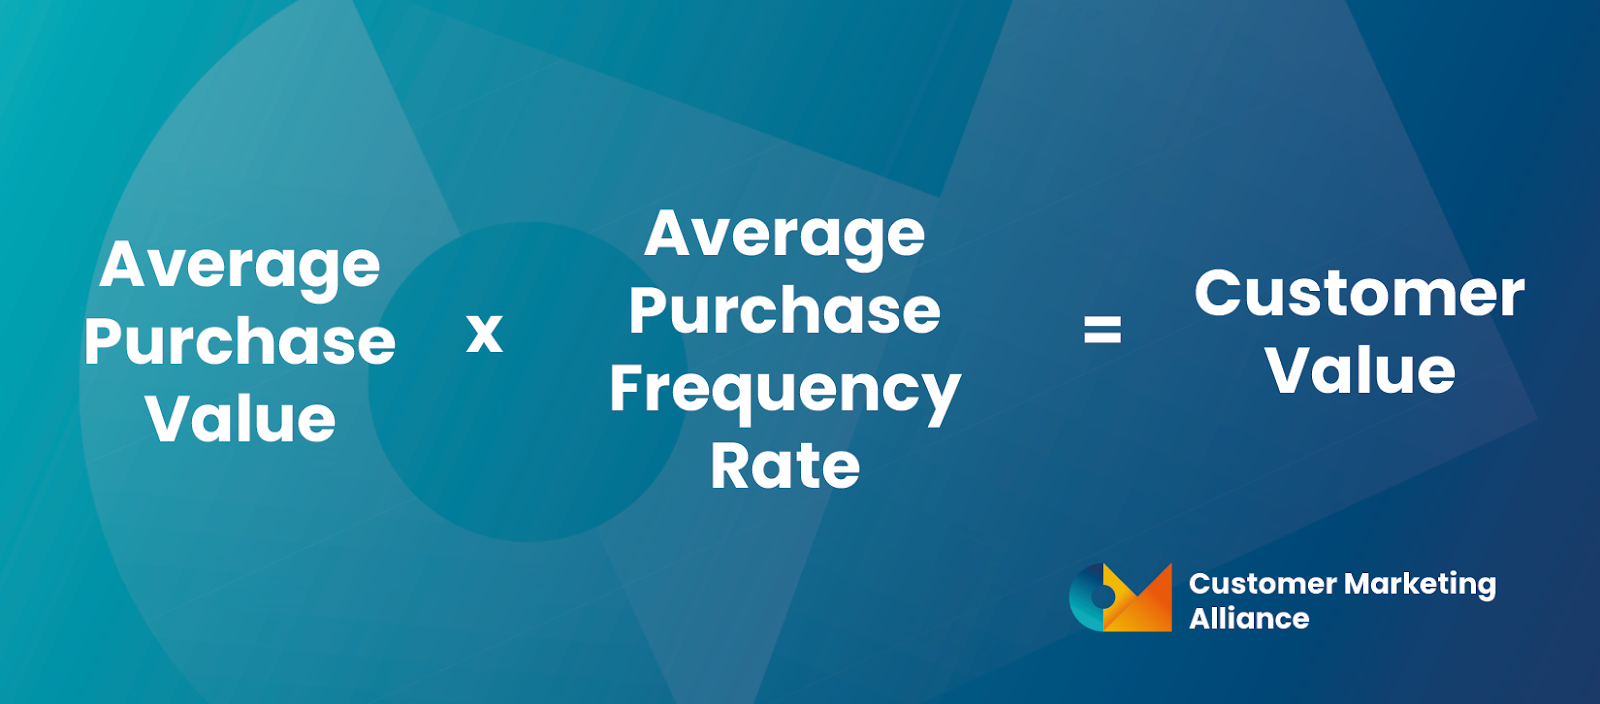 { average purchase value x average purchase frequency rate = customer value }